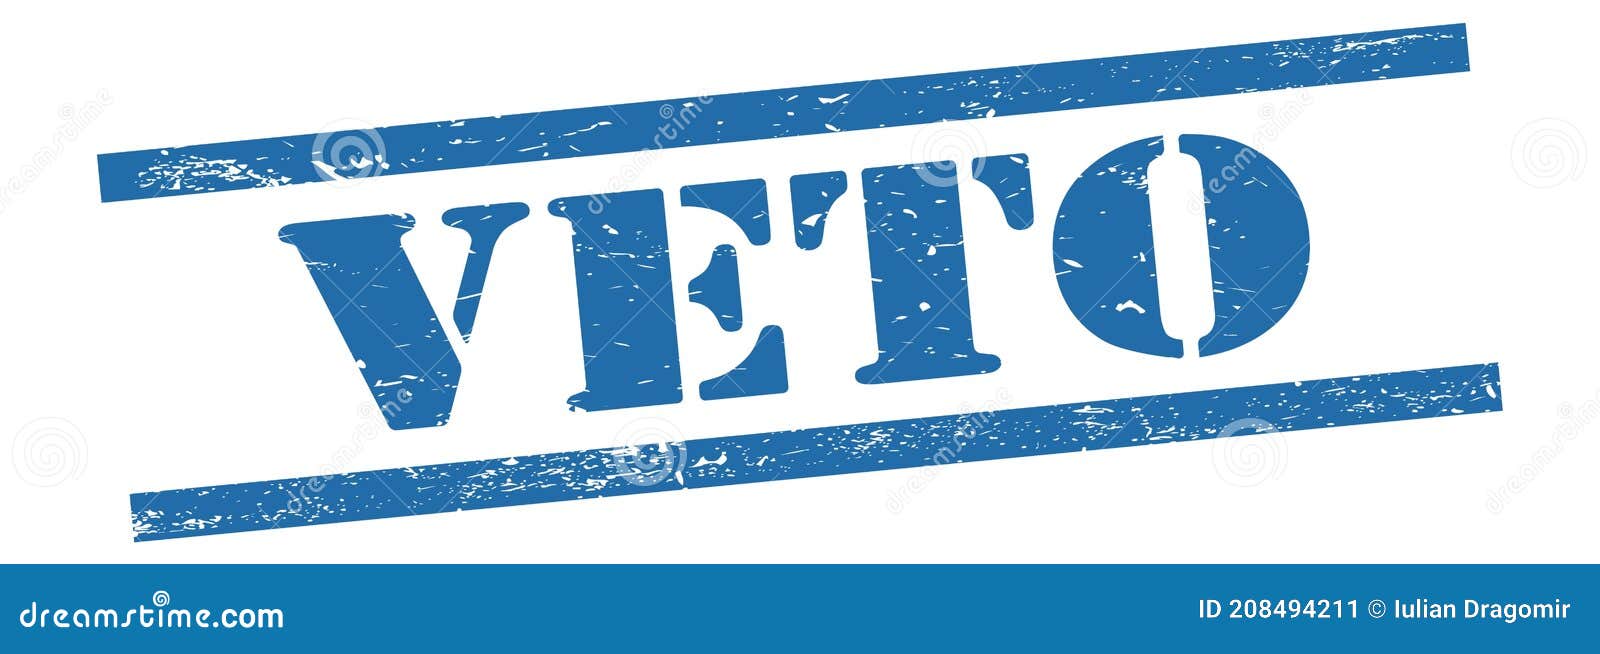 veto text on blue grungy lines stamp